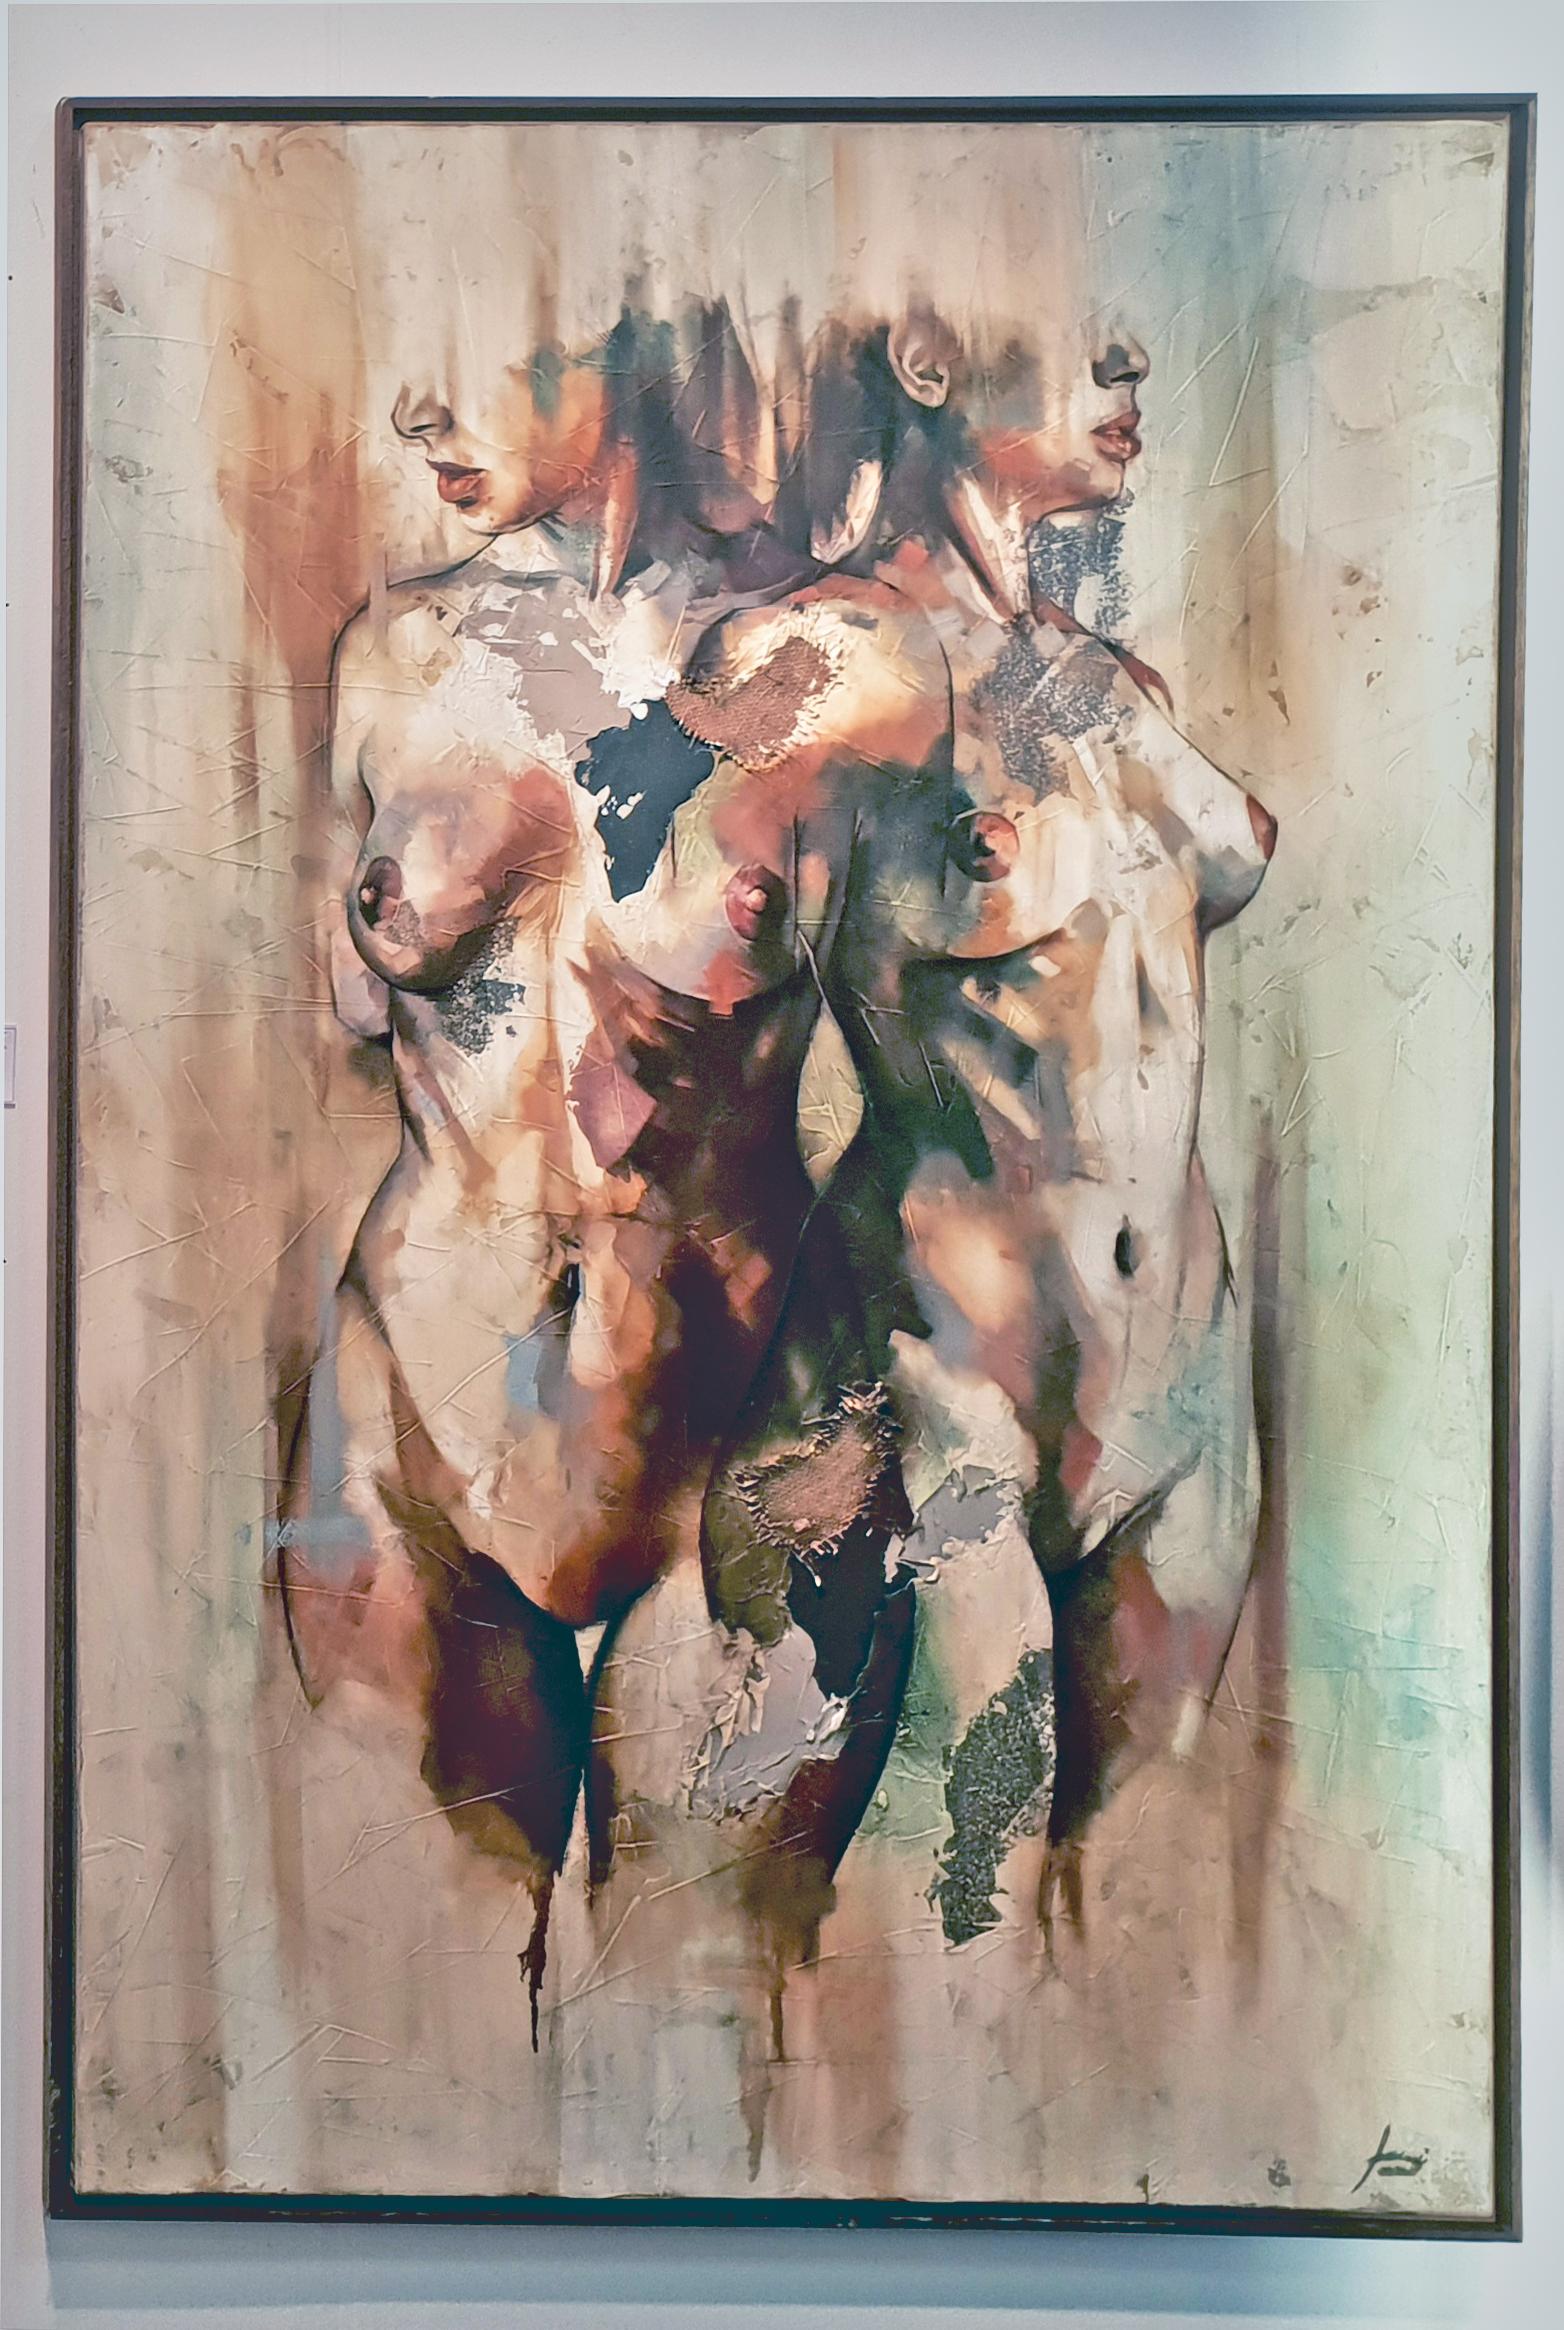 Efimero by Francisco Jimenez - Elegant Abstract Figurative painting of two women - Contemporary Painting by Francisco Jose Jimenez